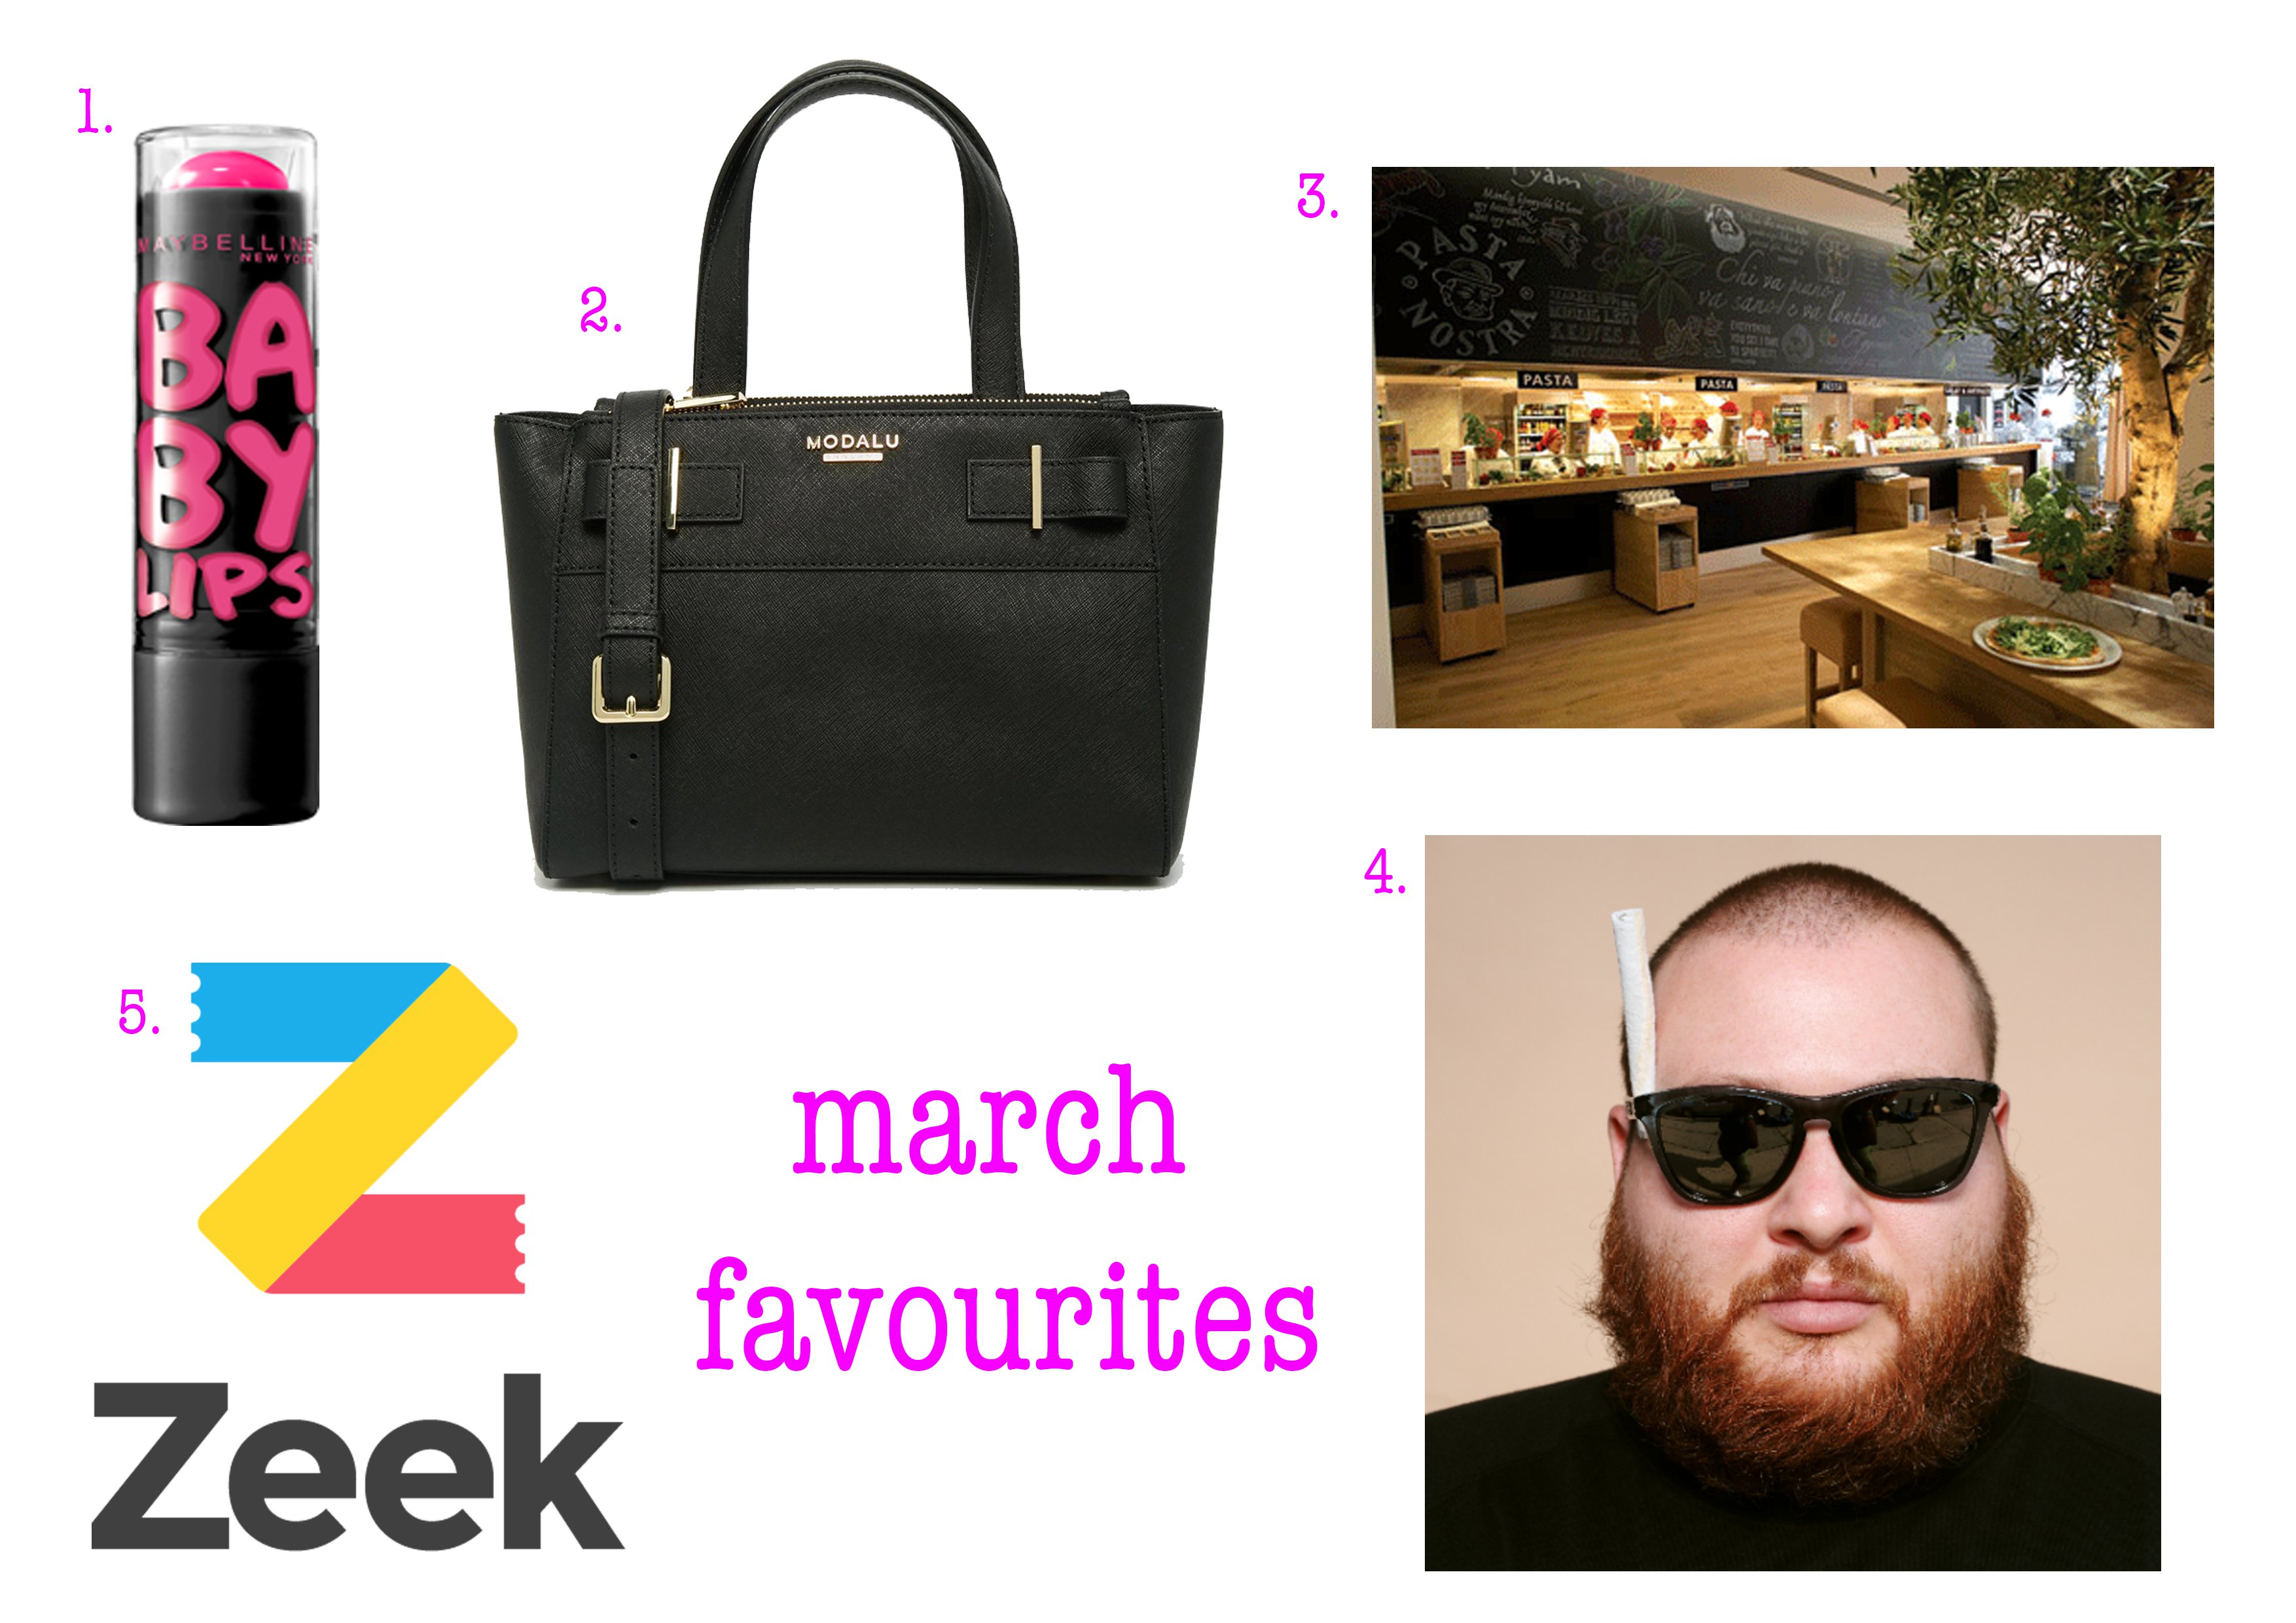 March Favourites